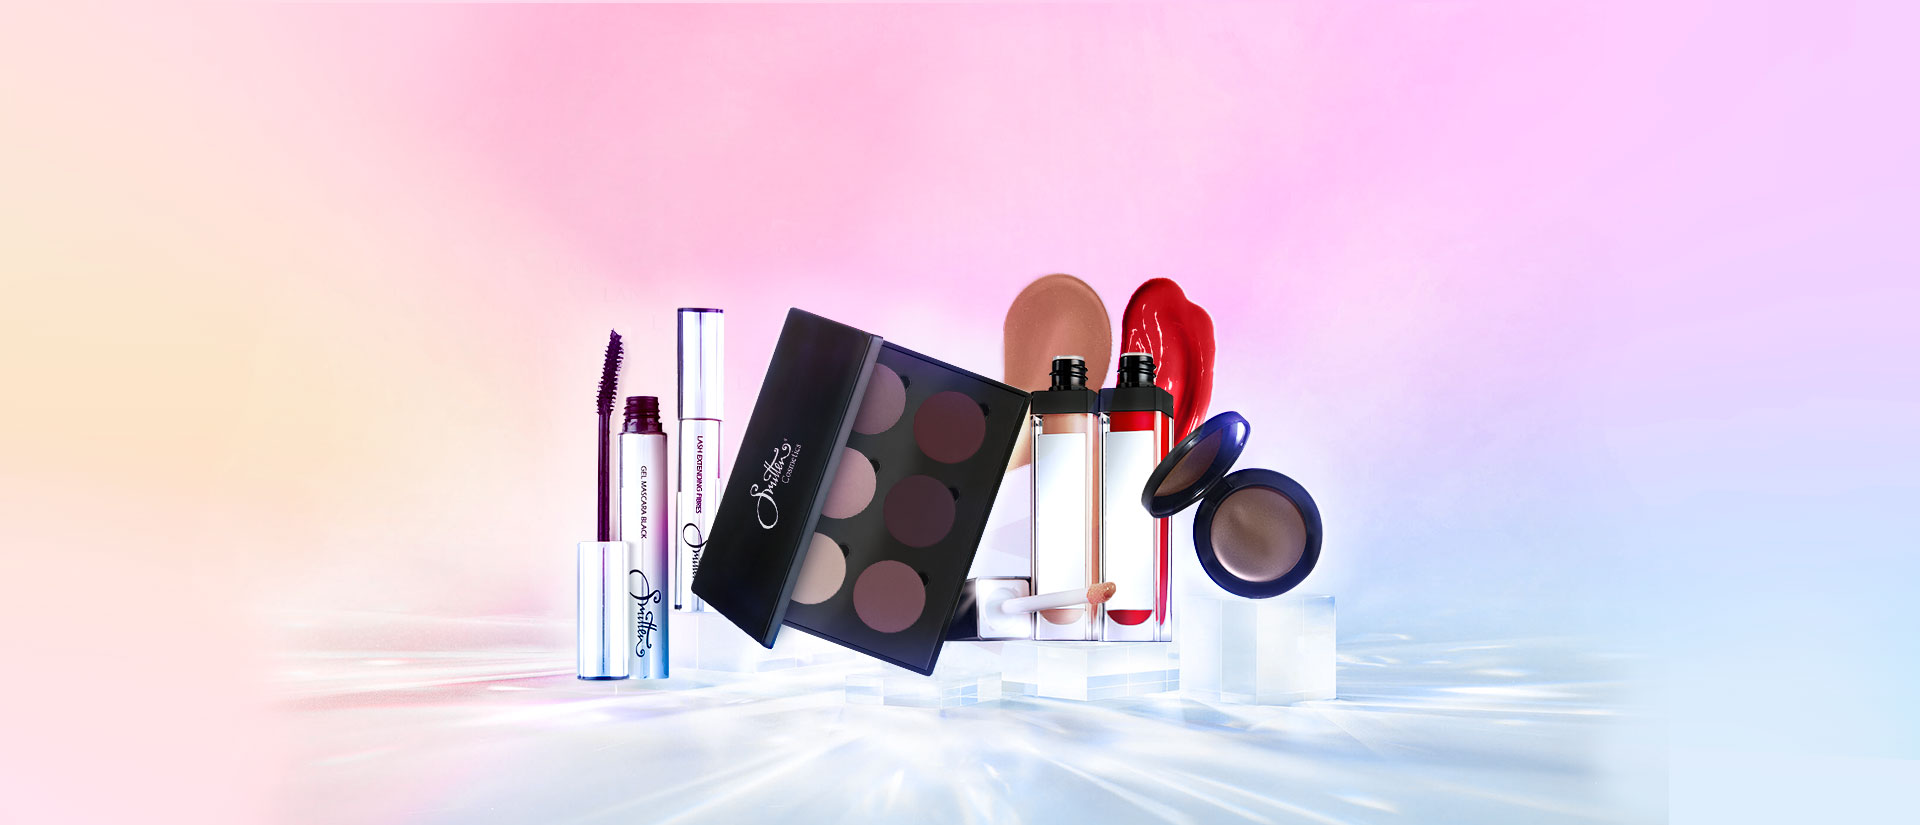 Influenced by Smitten Makeup Bundle Save Value